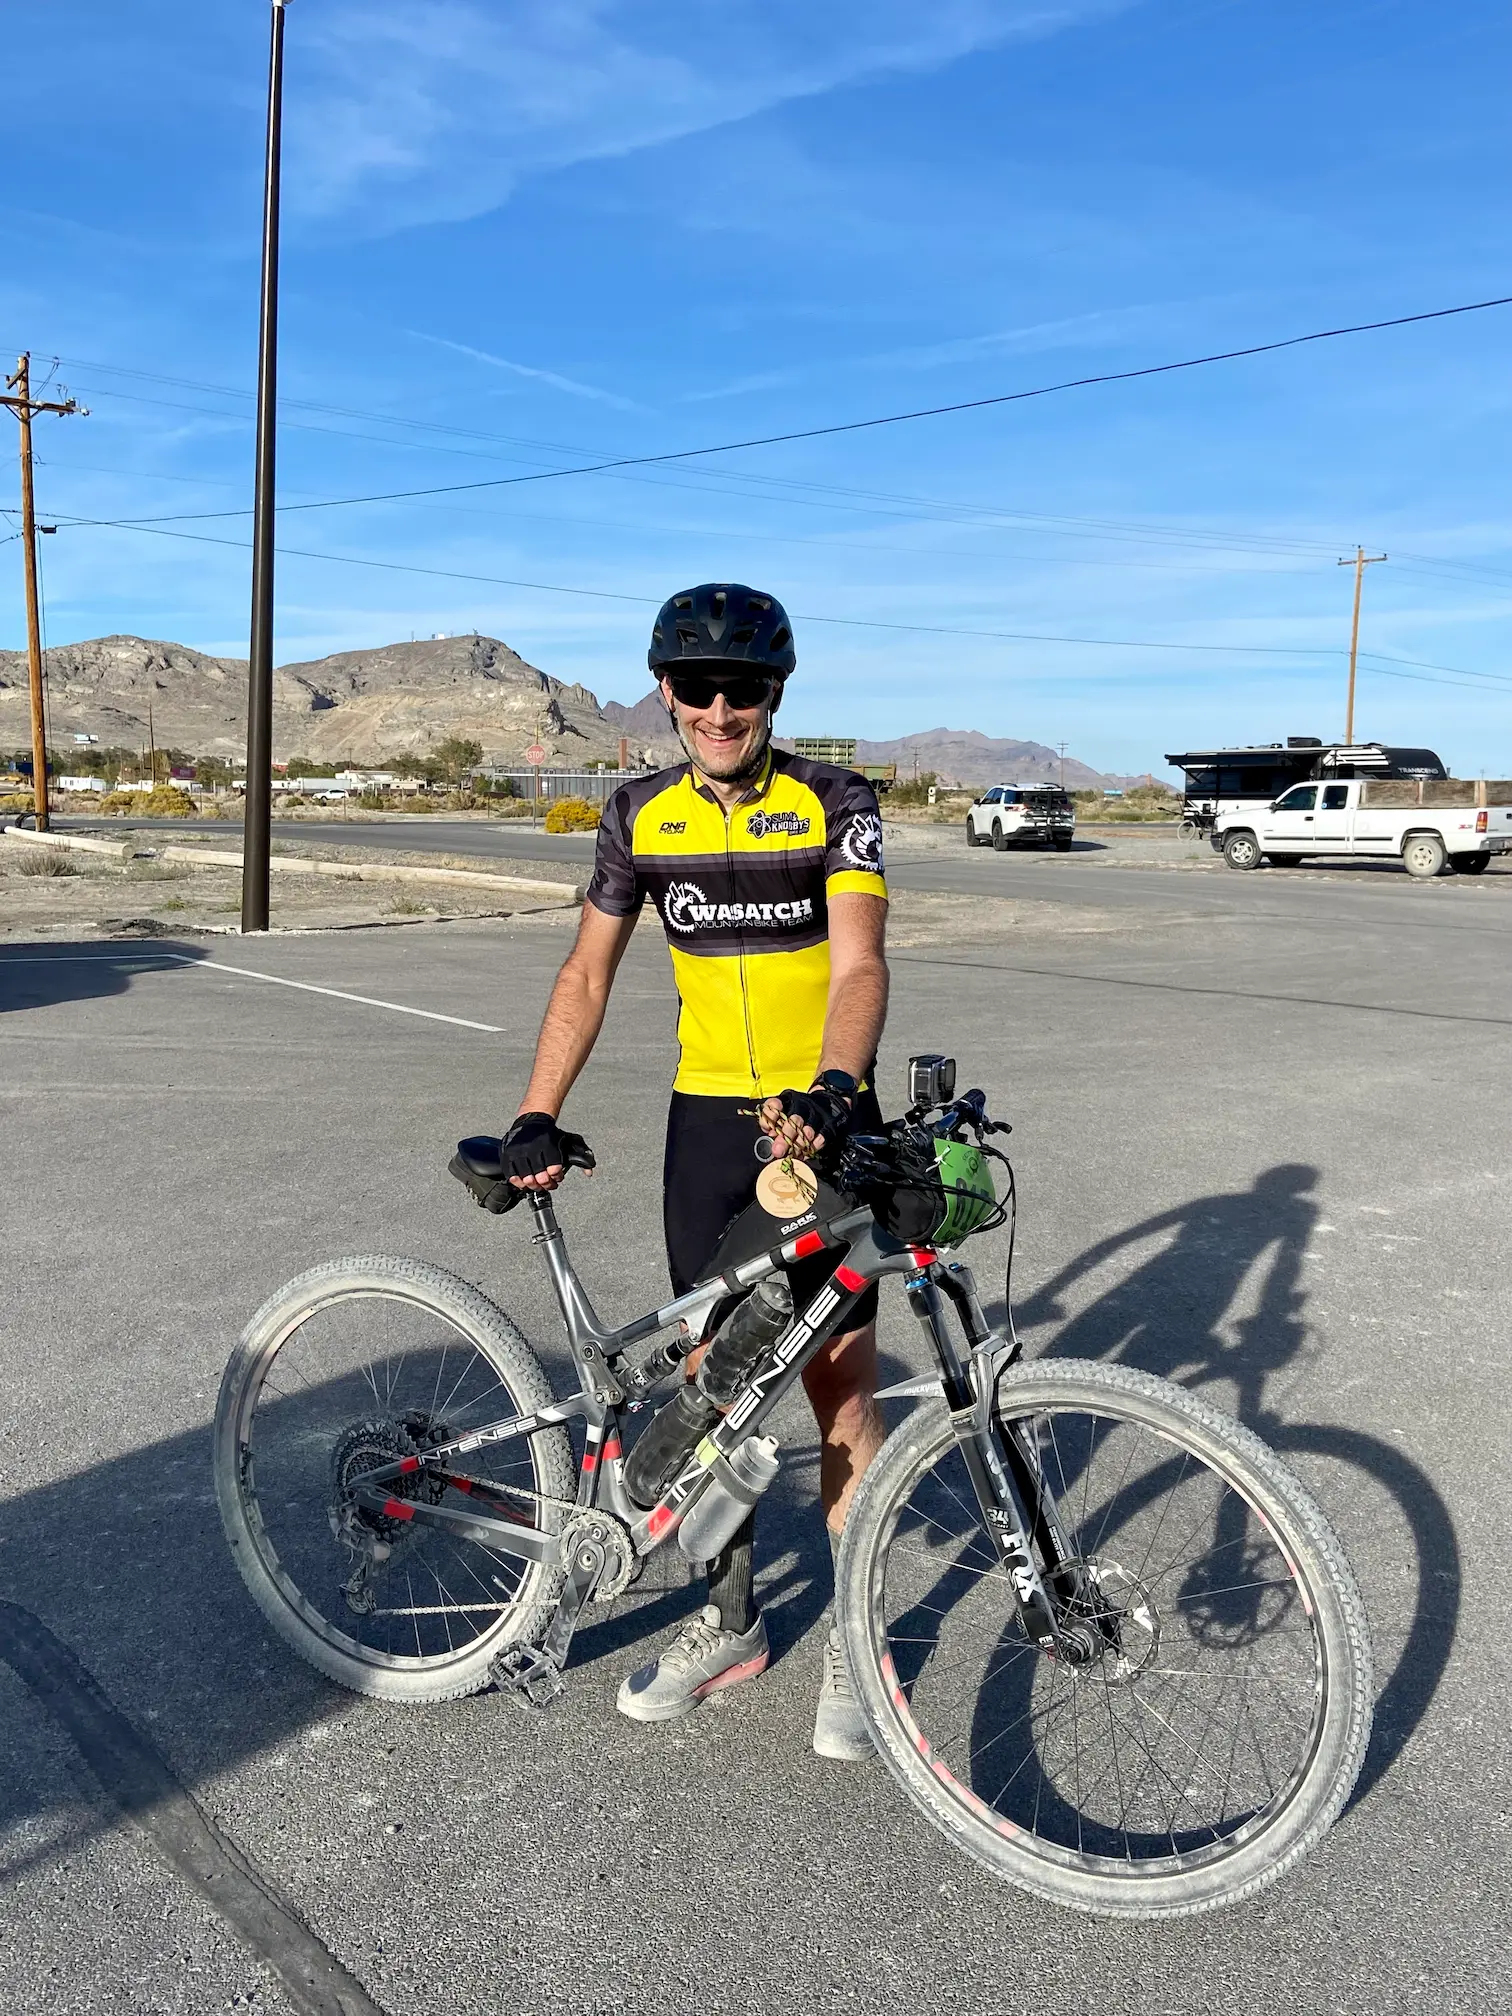 Keith has just completed the 2022 Salty Lizard 100 gravel race in Wendover, NV 